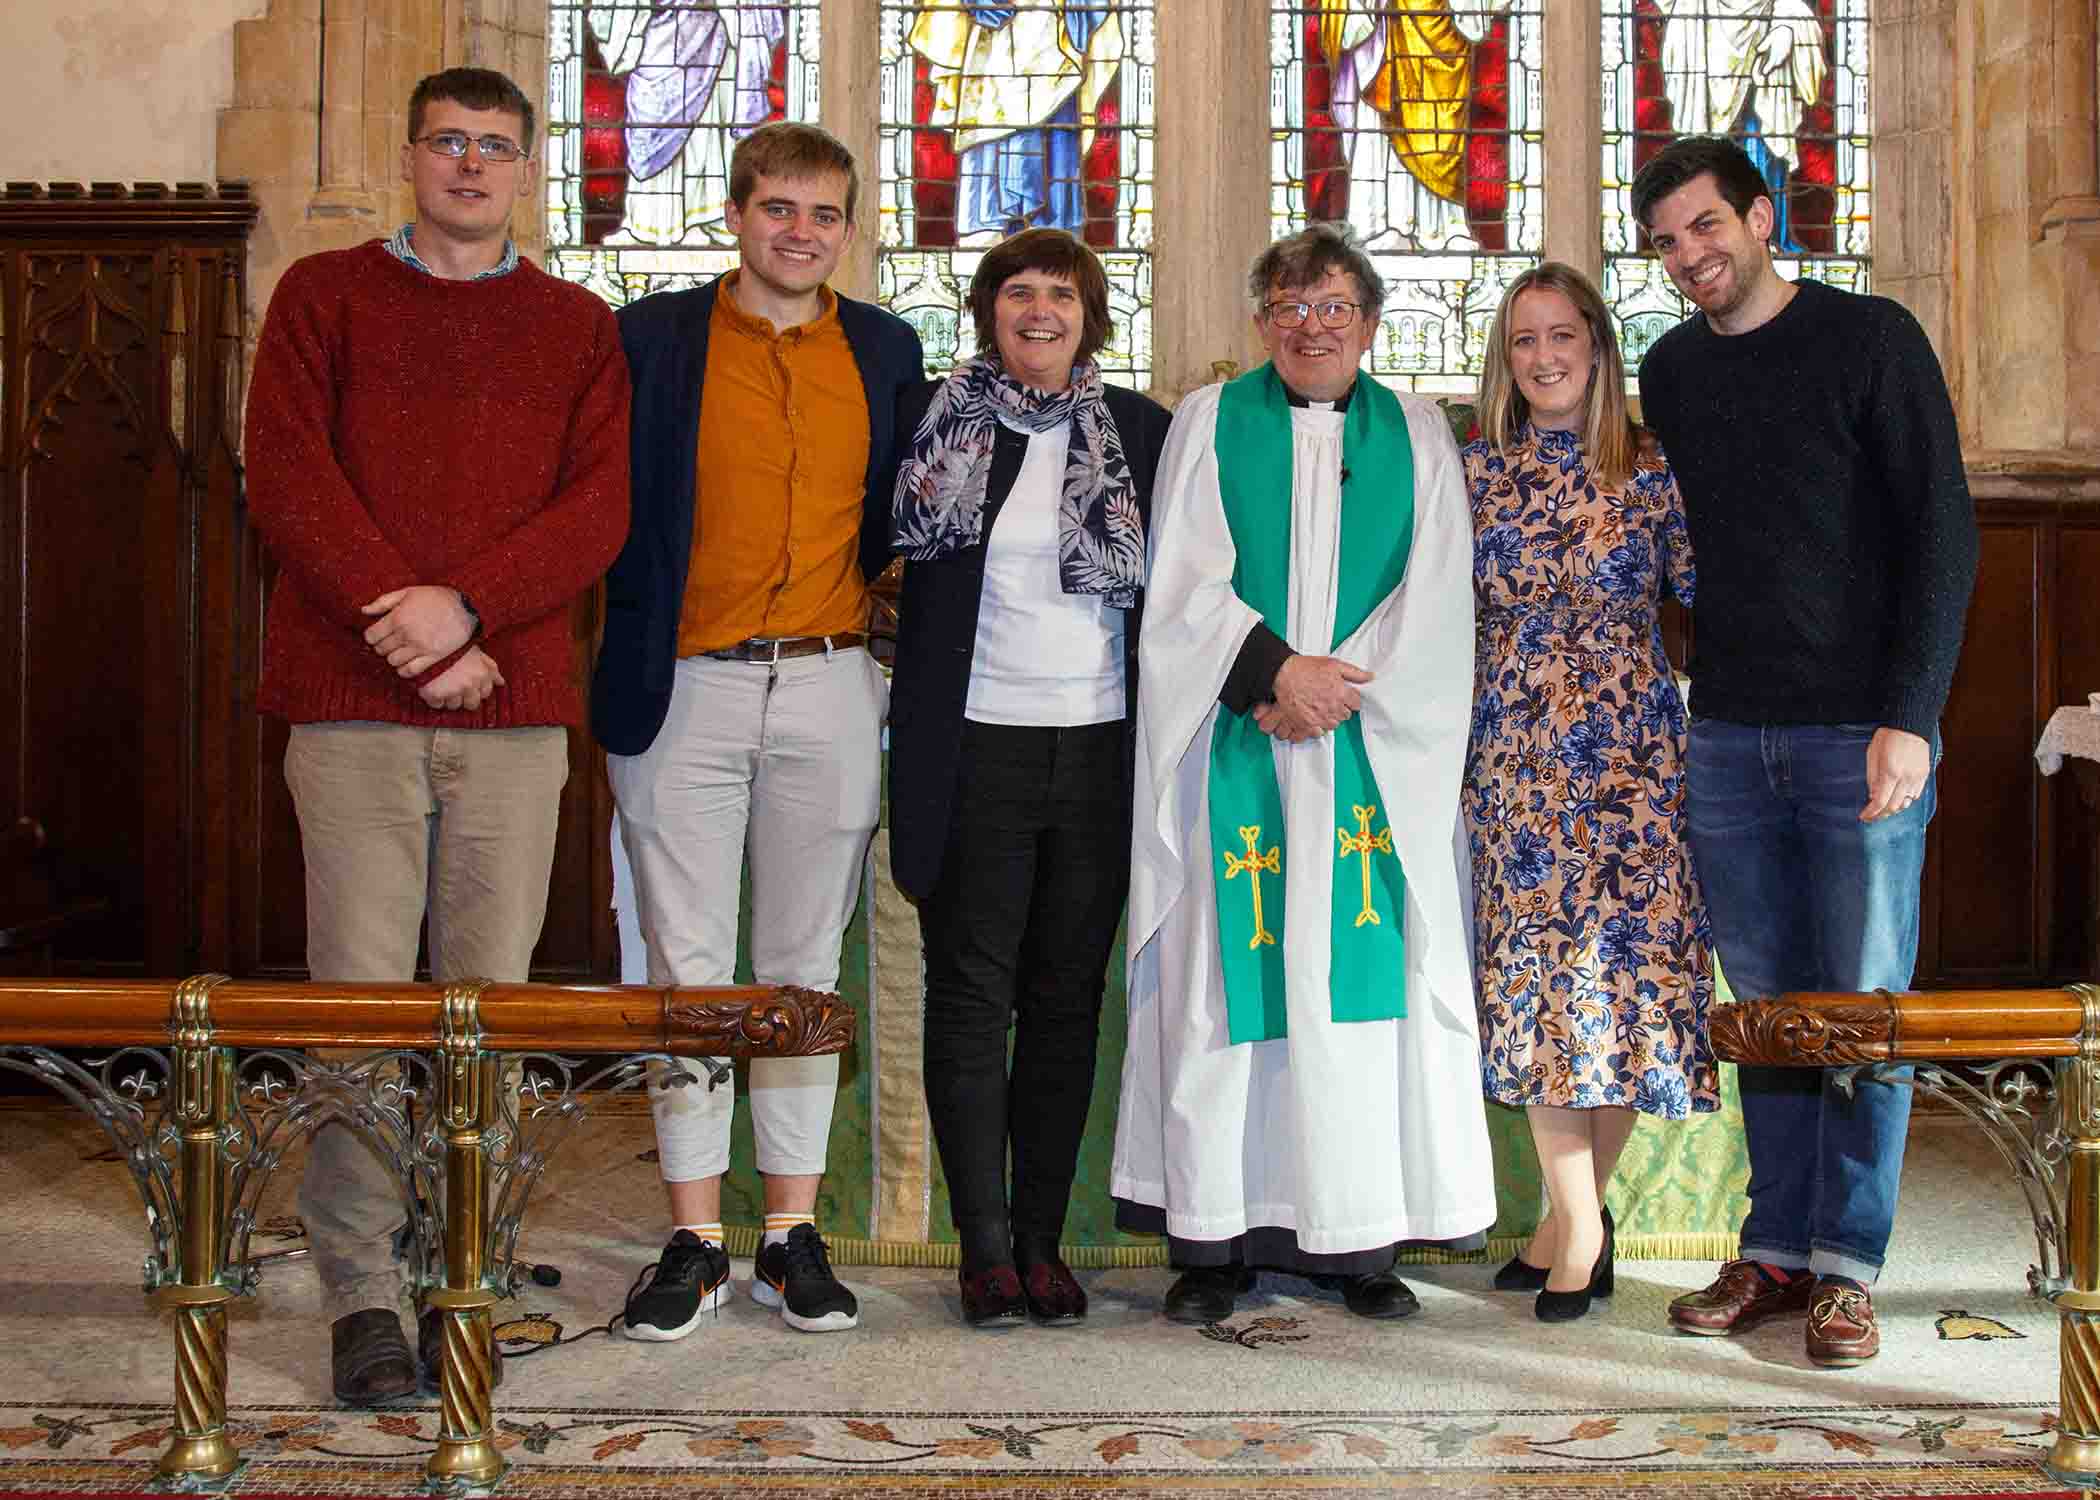 The Very Rev Chris Peters with his family (left to right): Hugh, Alex, Judy, Chris, Orla (daughter-in-law) and Nick.